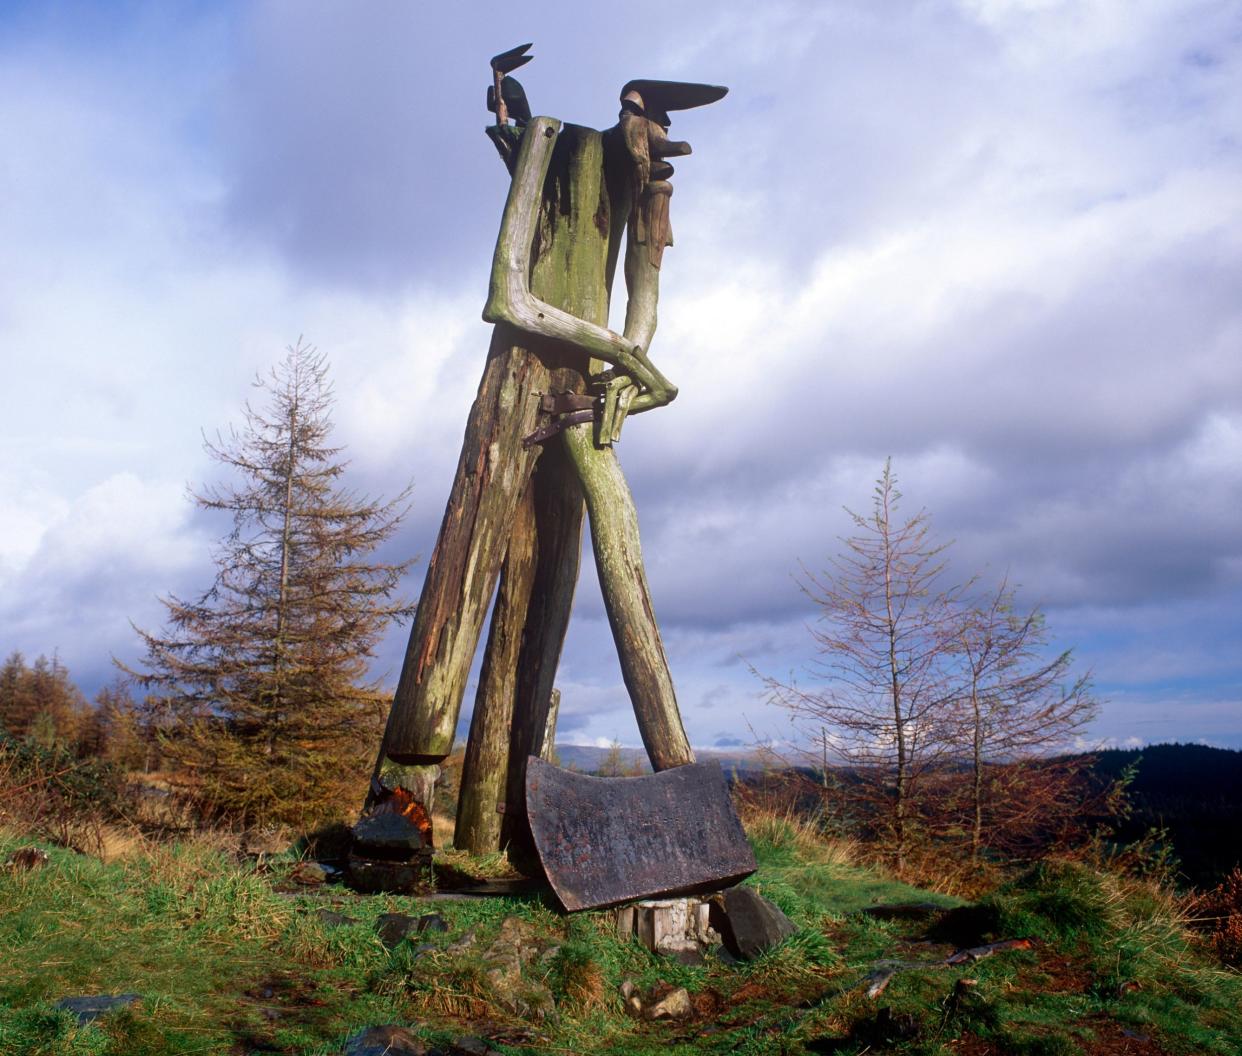 More than 50 sculptures have been installed across Grizedale forest over the past half-century